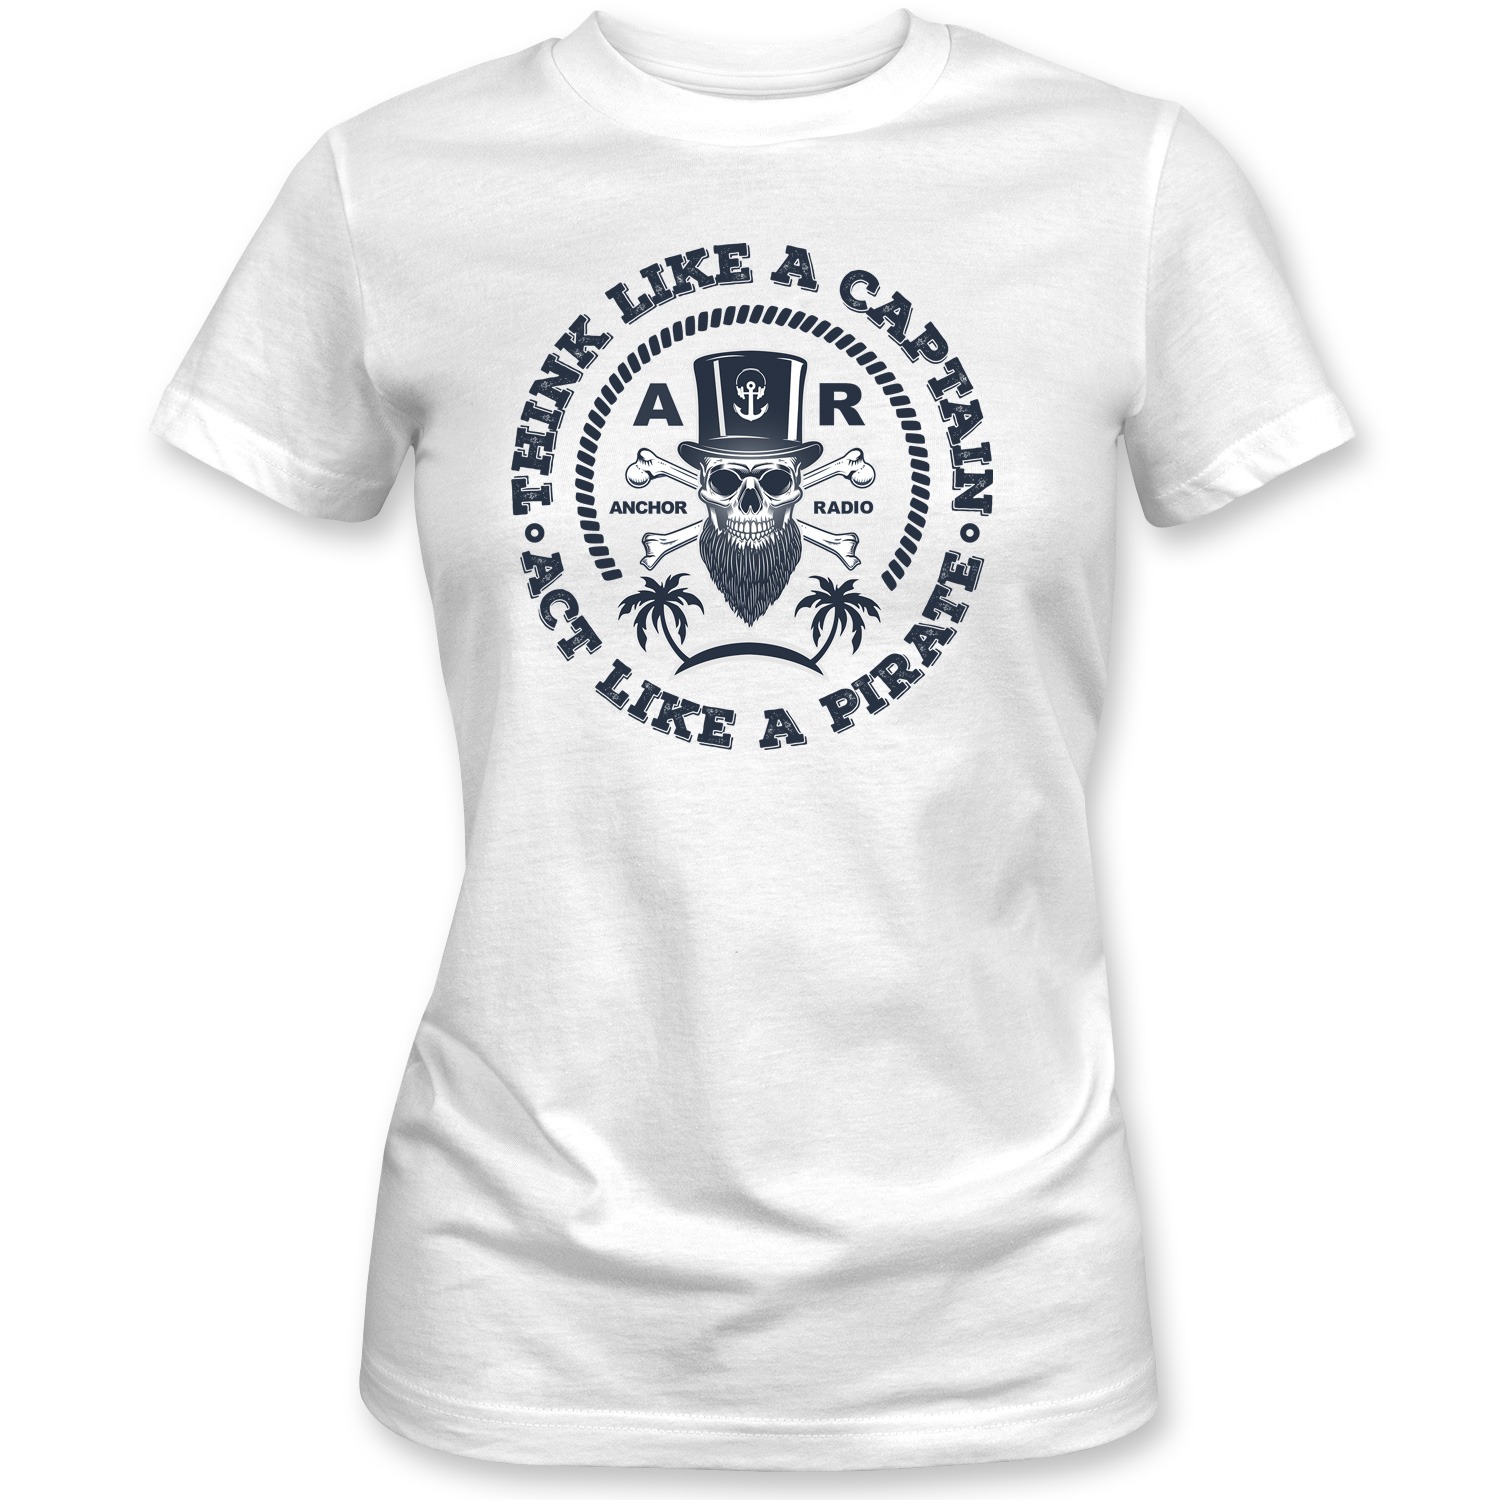 Anchor Radio Show Pirate Ladies Fitted Tee, The Troprock Shop